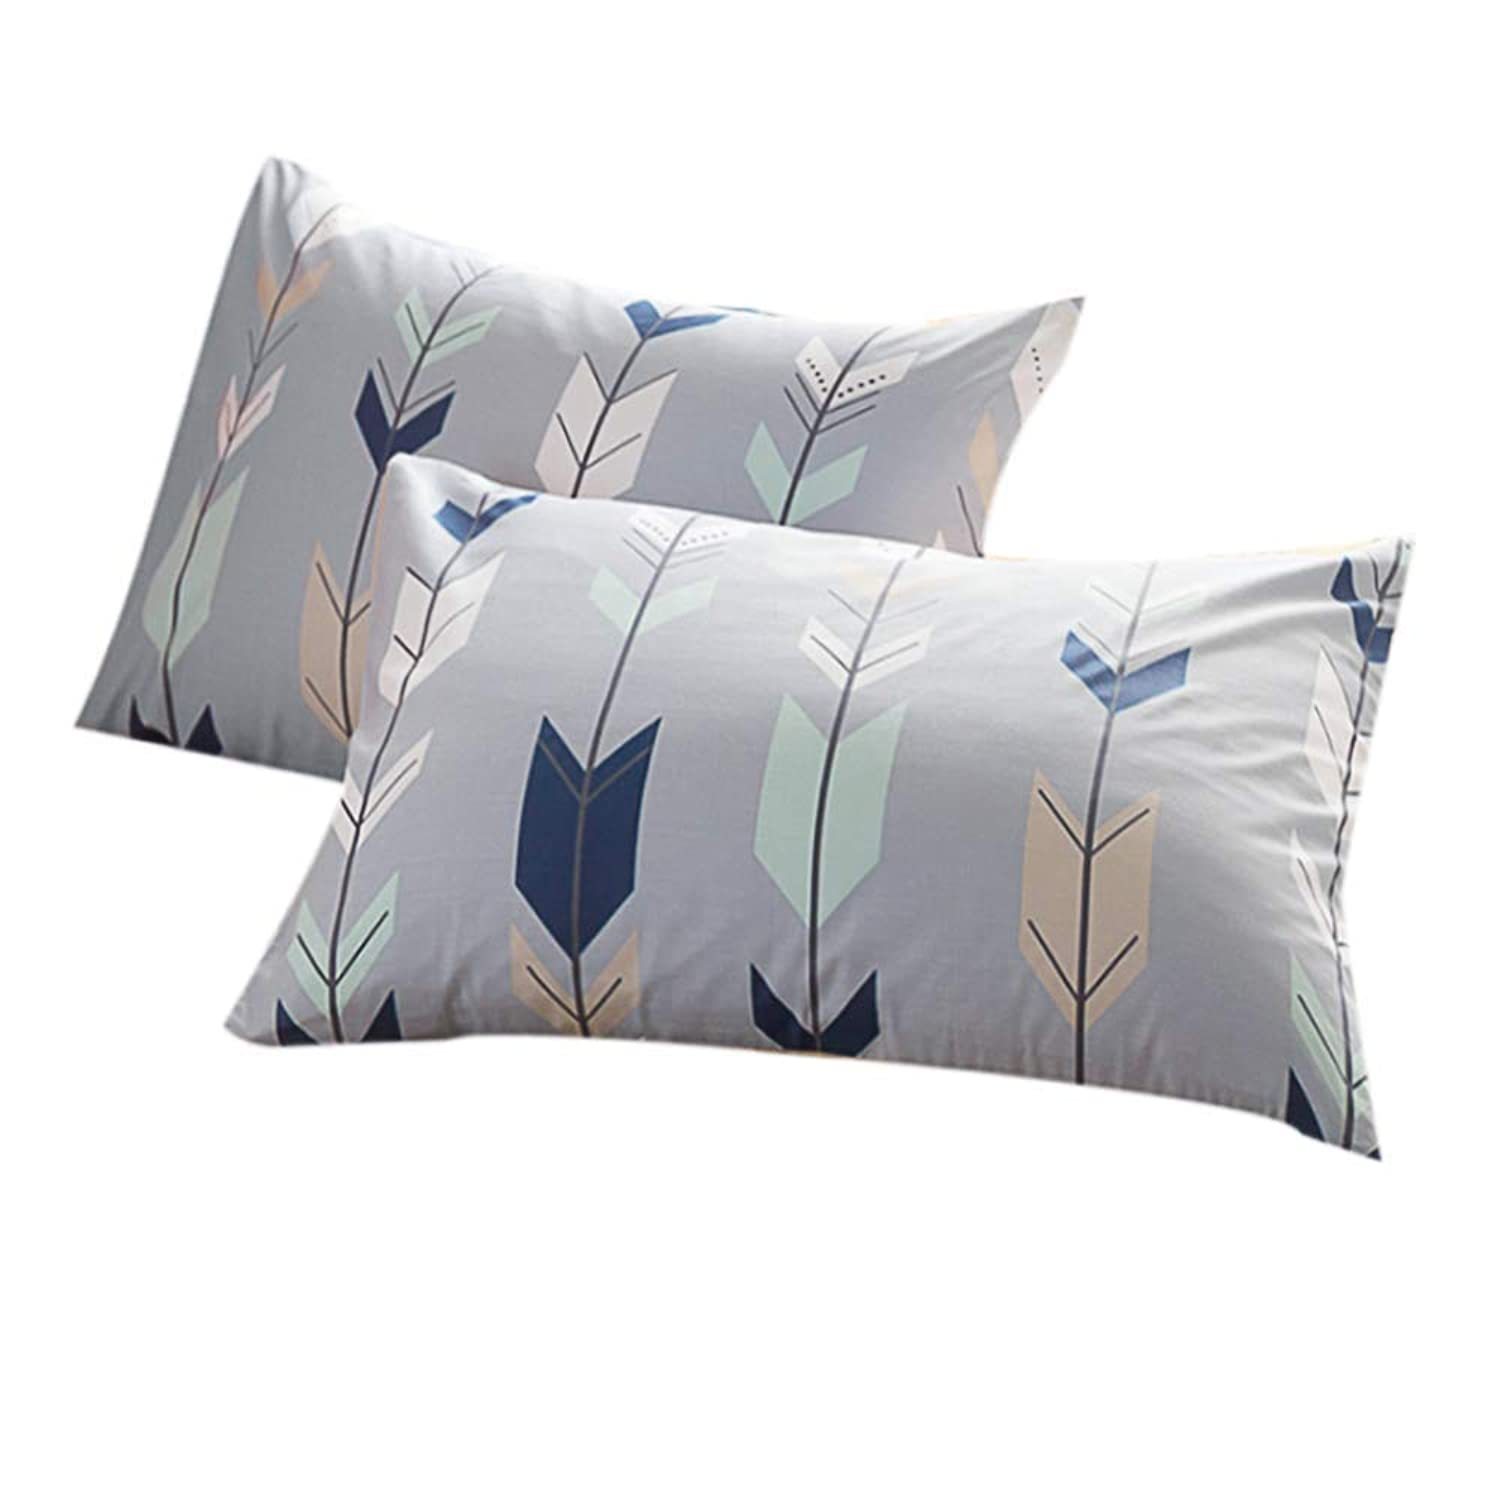 Pillow Cases Set Of 2 - Arrow Feather Printed Pattern Standard Size (2